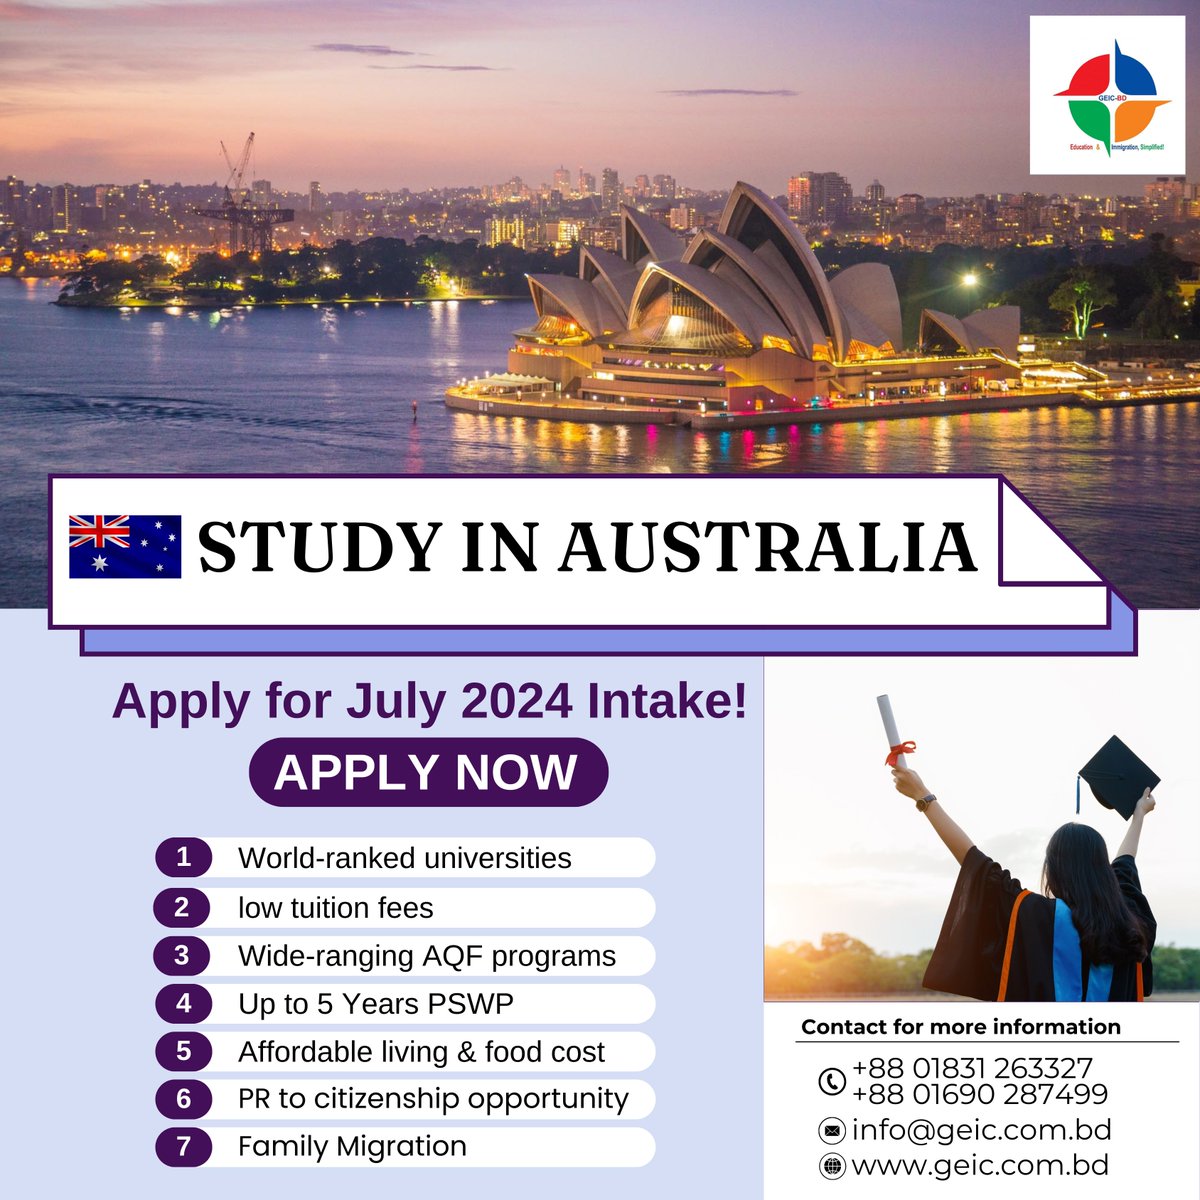 ' Make your Study Abroad dream come true '
' Study in Australia '
Apply now for Upcoming Intake July 2024
#studyaboard #studyabroad #studyaustralia #studyaesthetic #studyabroadlife #studyarchitecture #StudyAbroadJourney
#studyabroadconsultants